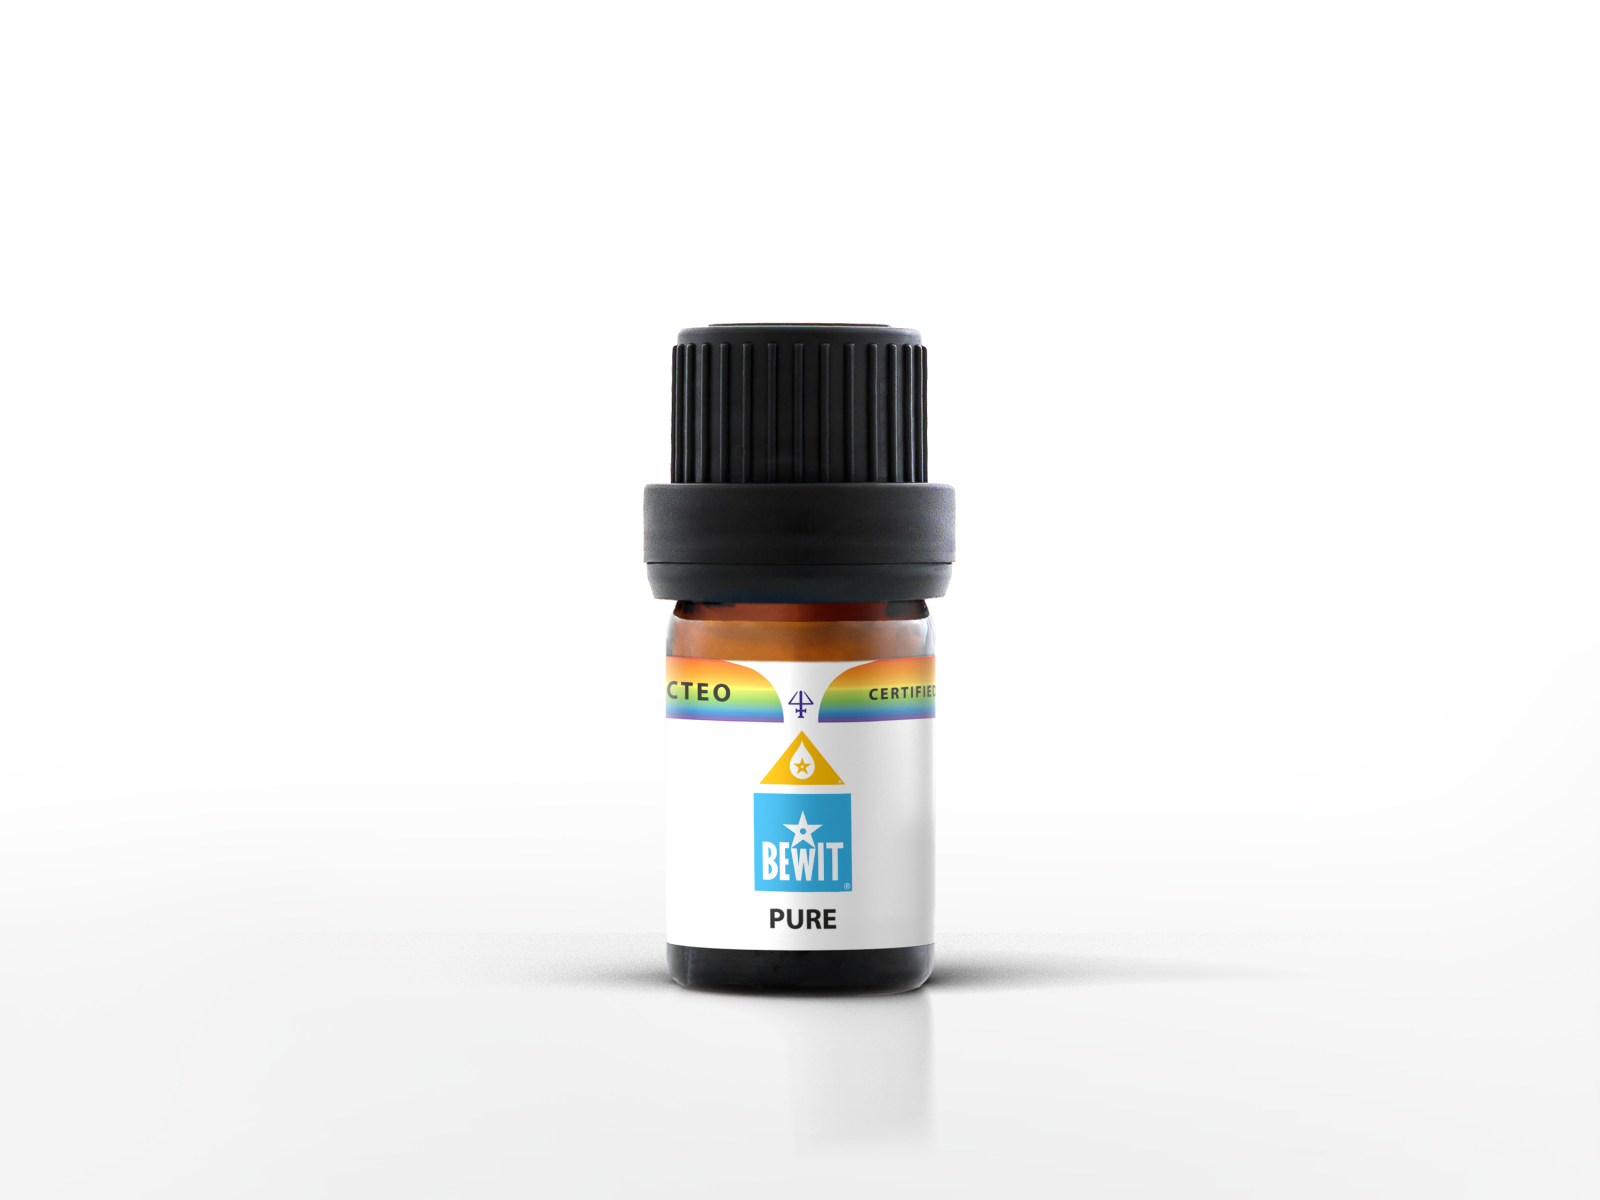 BEWIT PURE - A special blend of the essential oils - 2